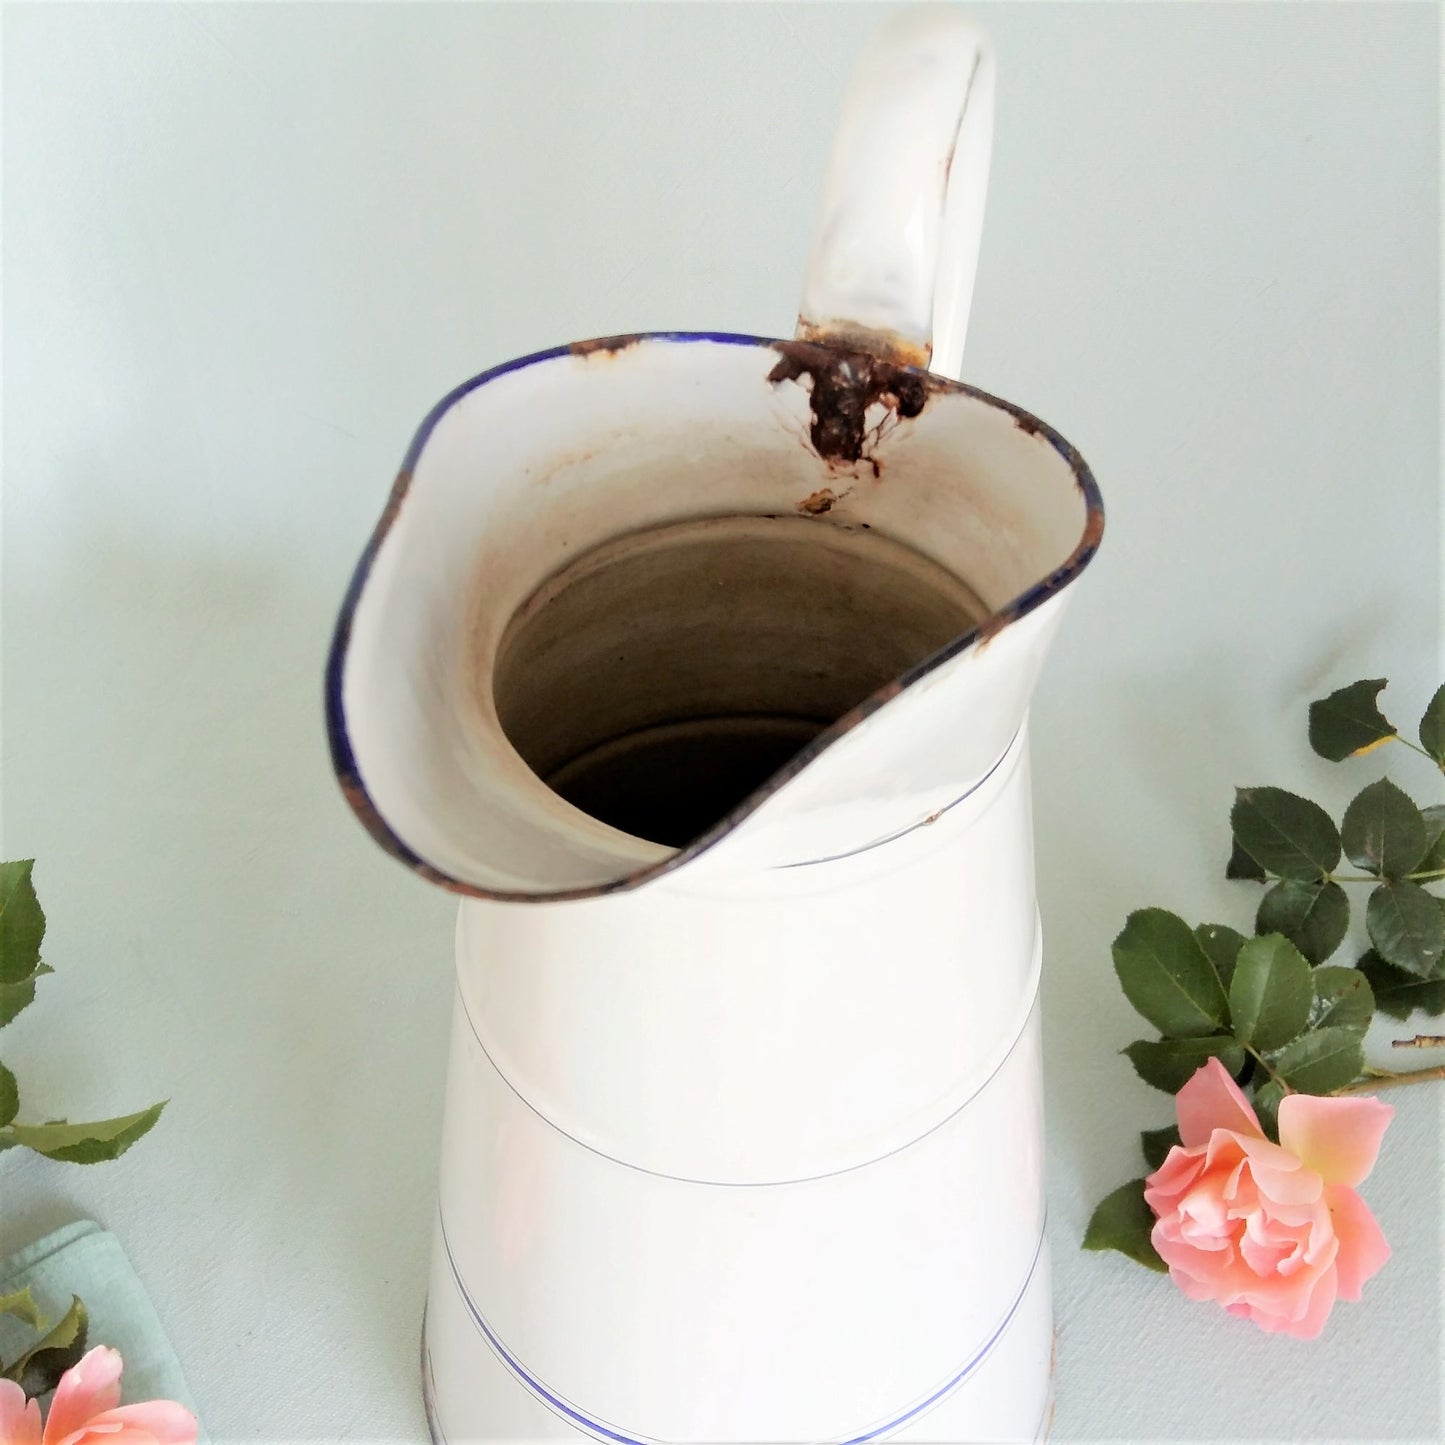 Large antique white enamel pitcher from Tiggy & Pip - €129! Shop now at Tiggy and Pip